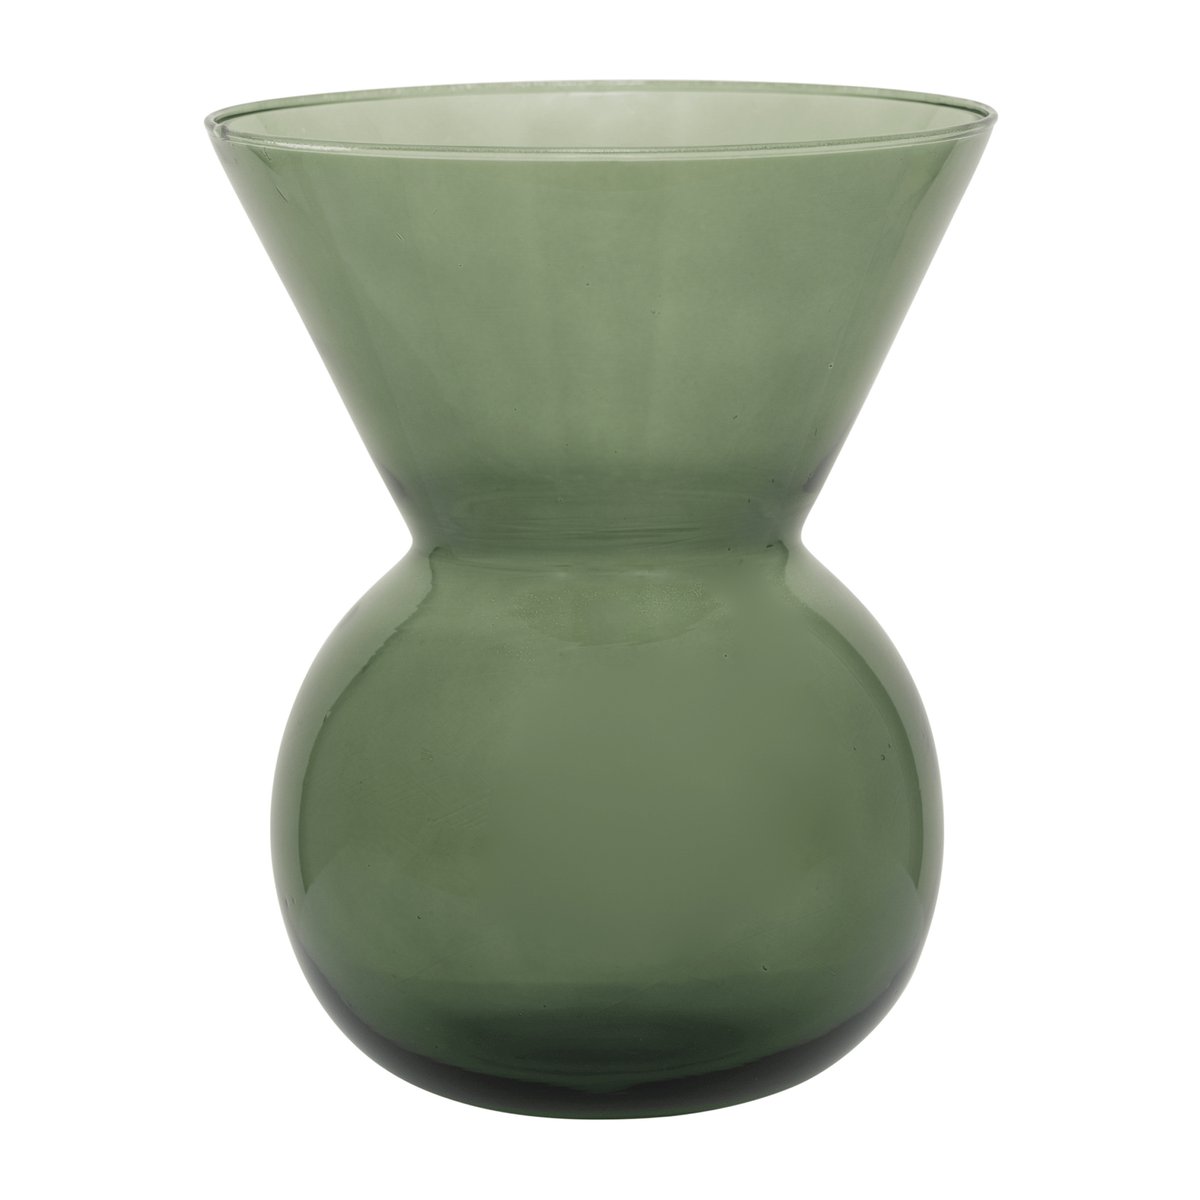 URBAN NATURE CULTURE By Mieke Cuppen vase 15 cm Duck green